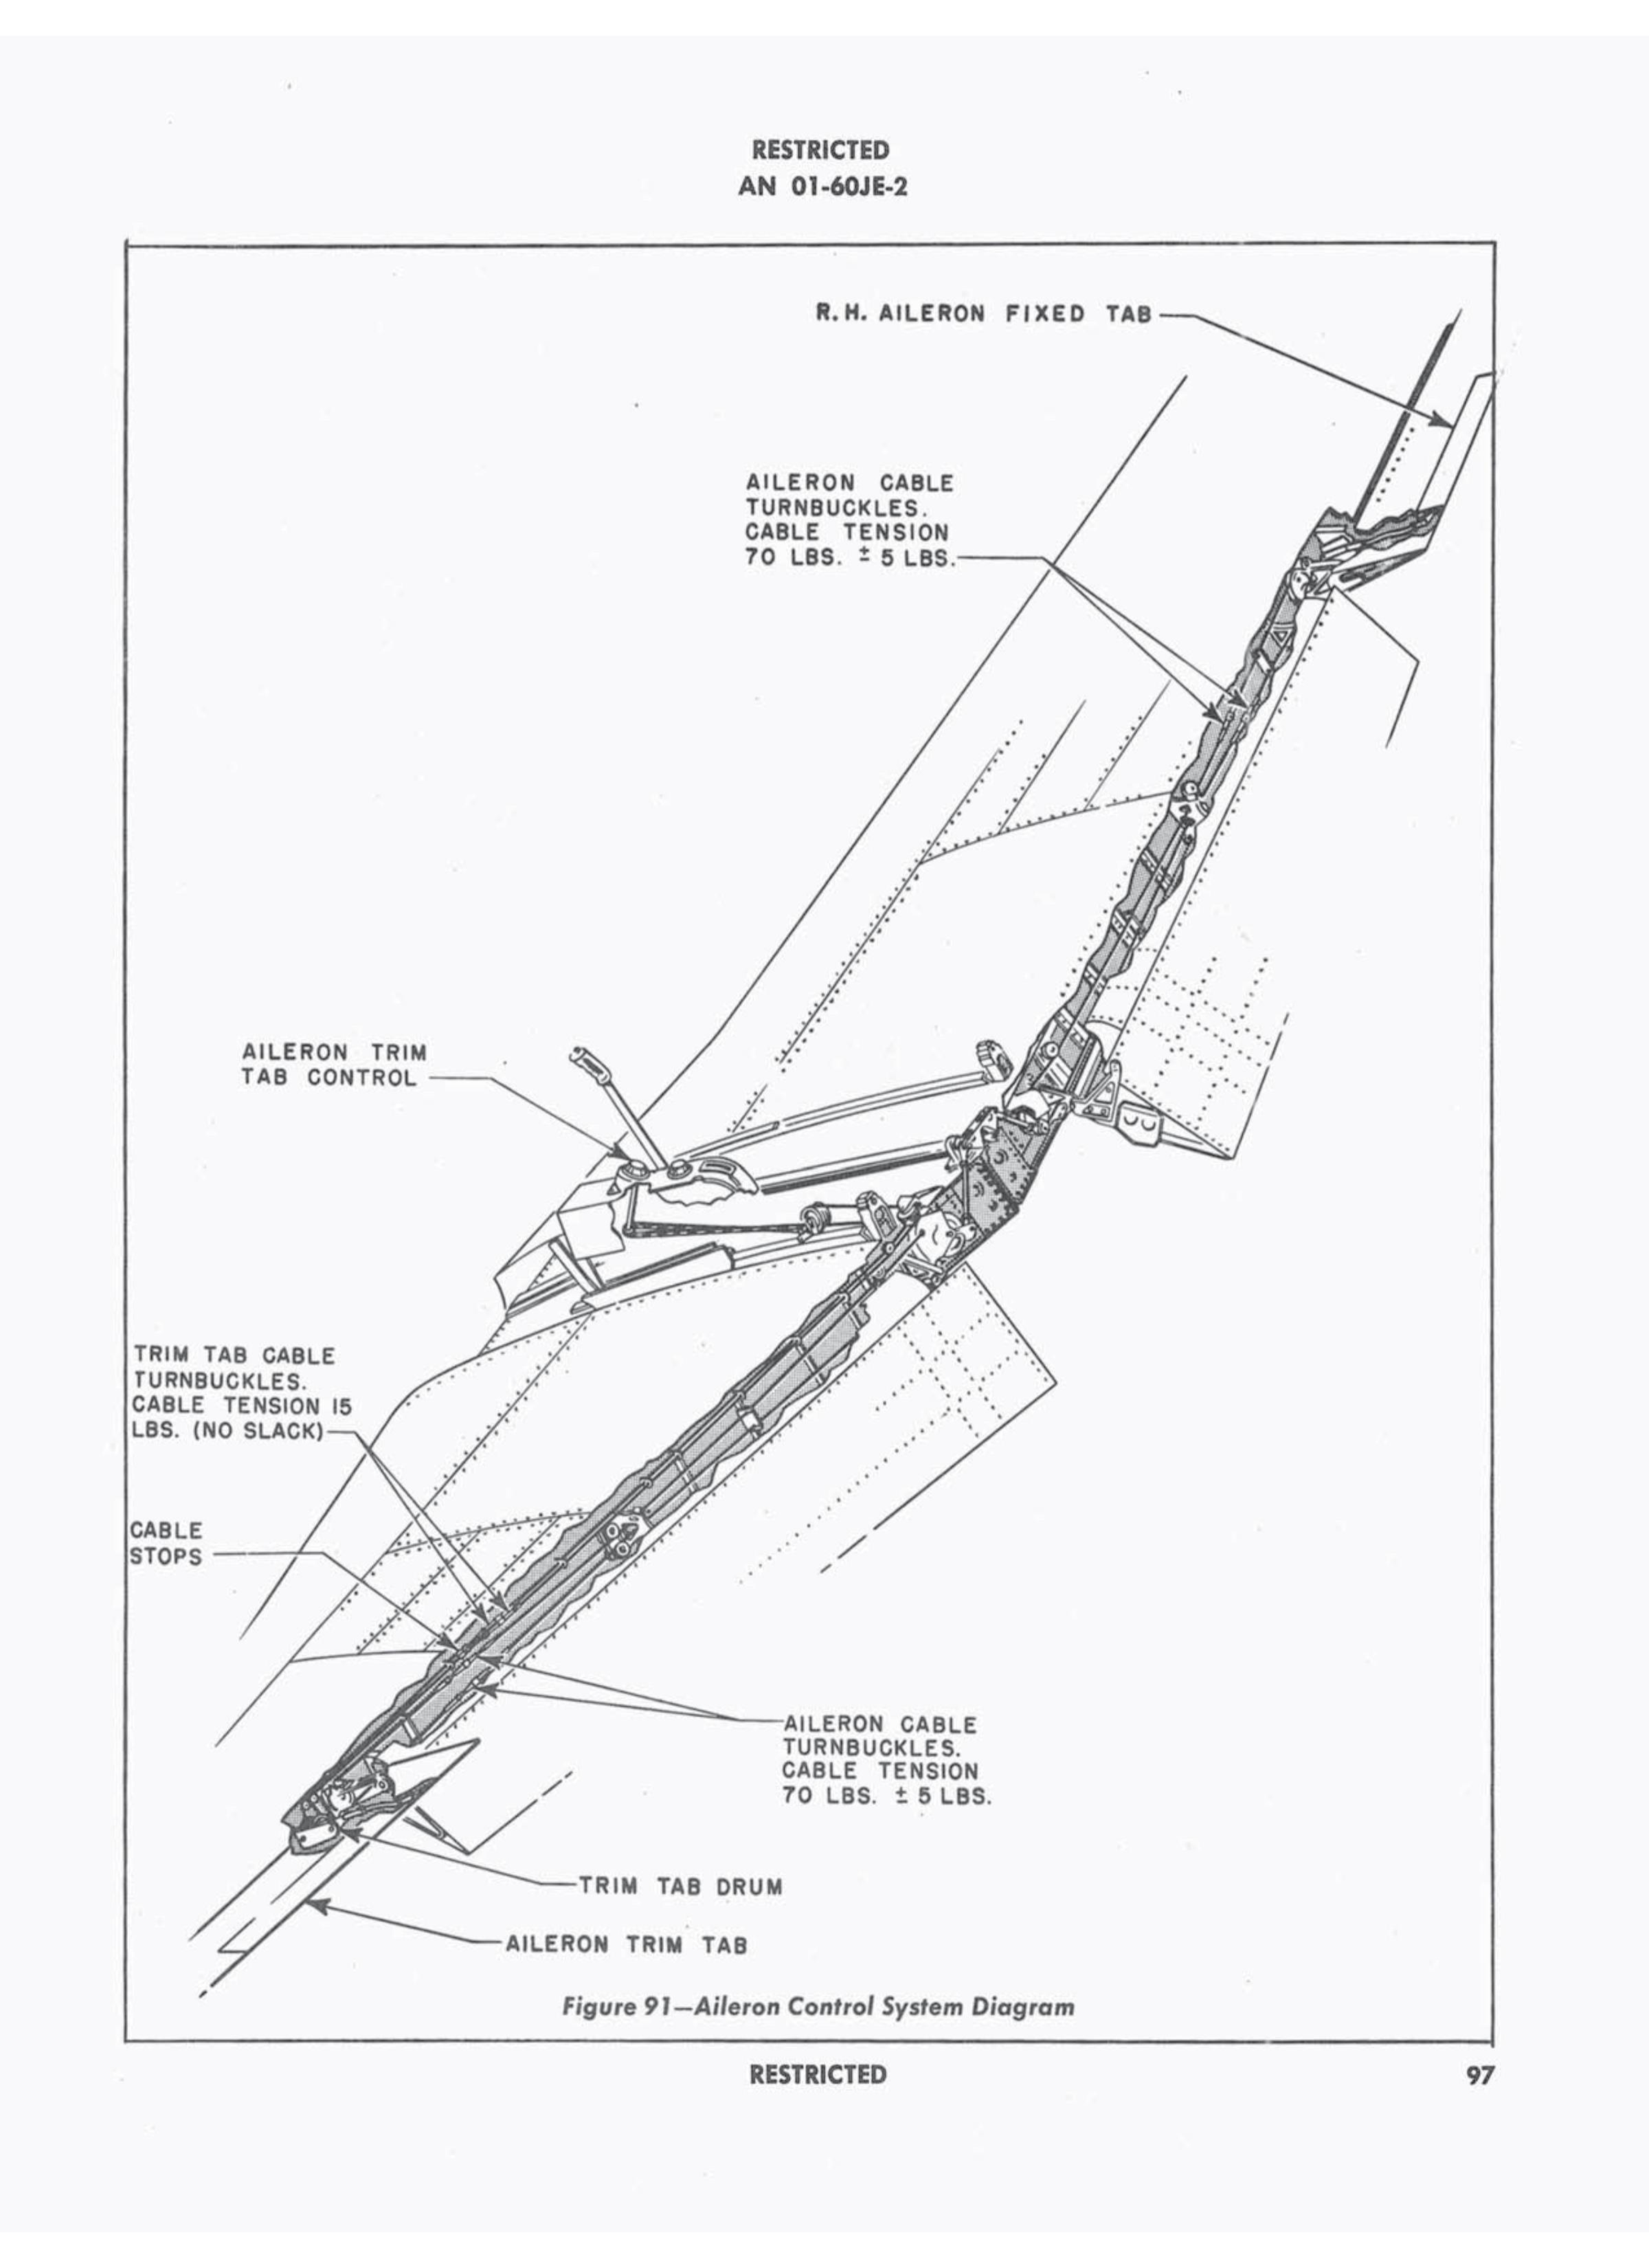 Sample page 101 from AirCorps Library document: Erection & Maintenance - P-51D-5